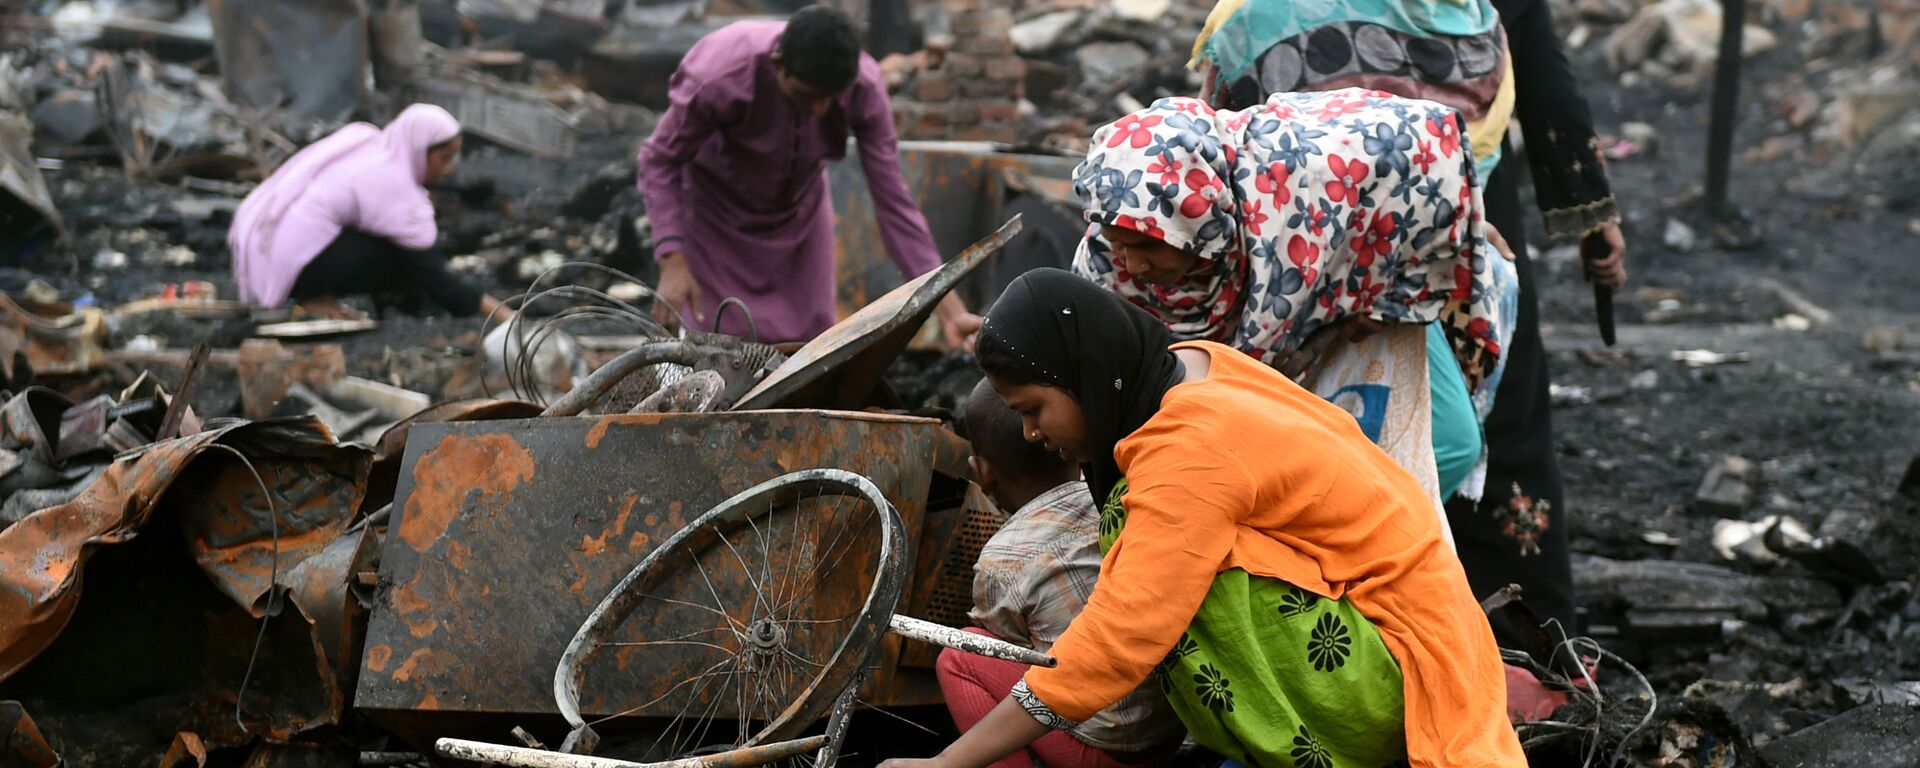 Rohingya refugees look for their belongings in New Delhi on April 16, 2018, following a fire that broke out at their camp early April 15 that left around 200 people homeless.  - Sputnik International, 1920, 09.03.2021